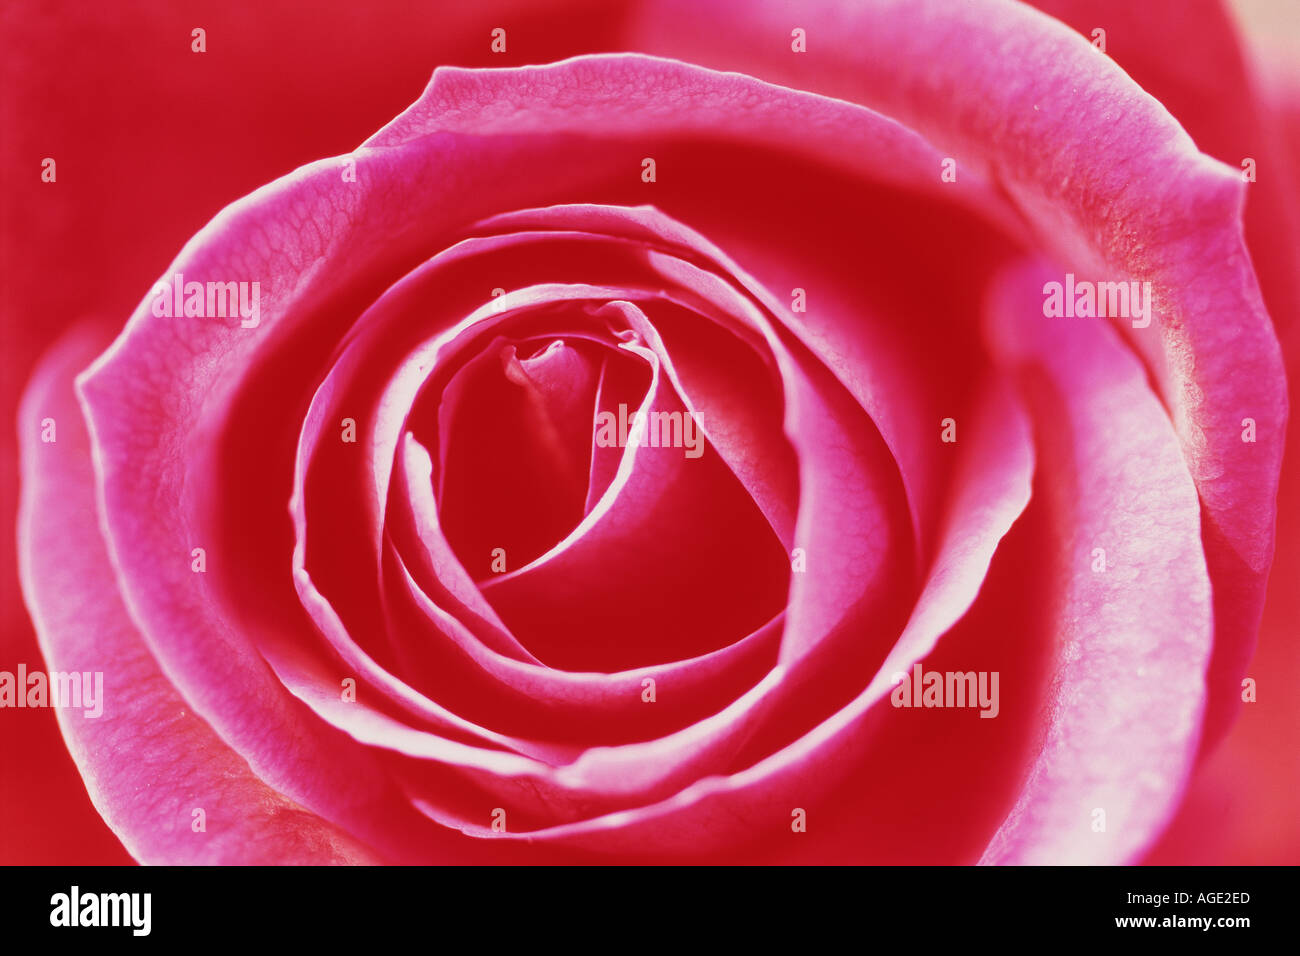 Artistry of nature offered in red rose Stock Photo